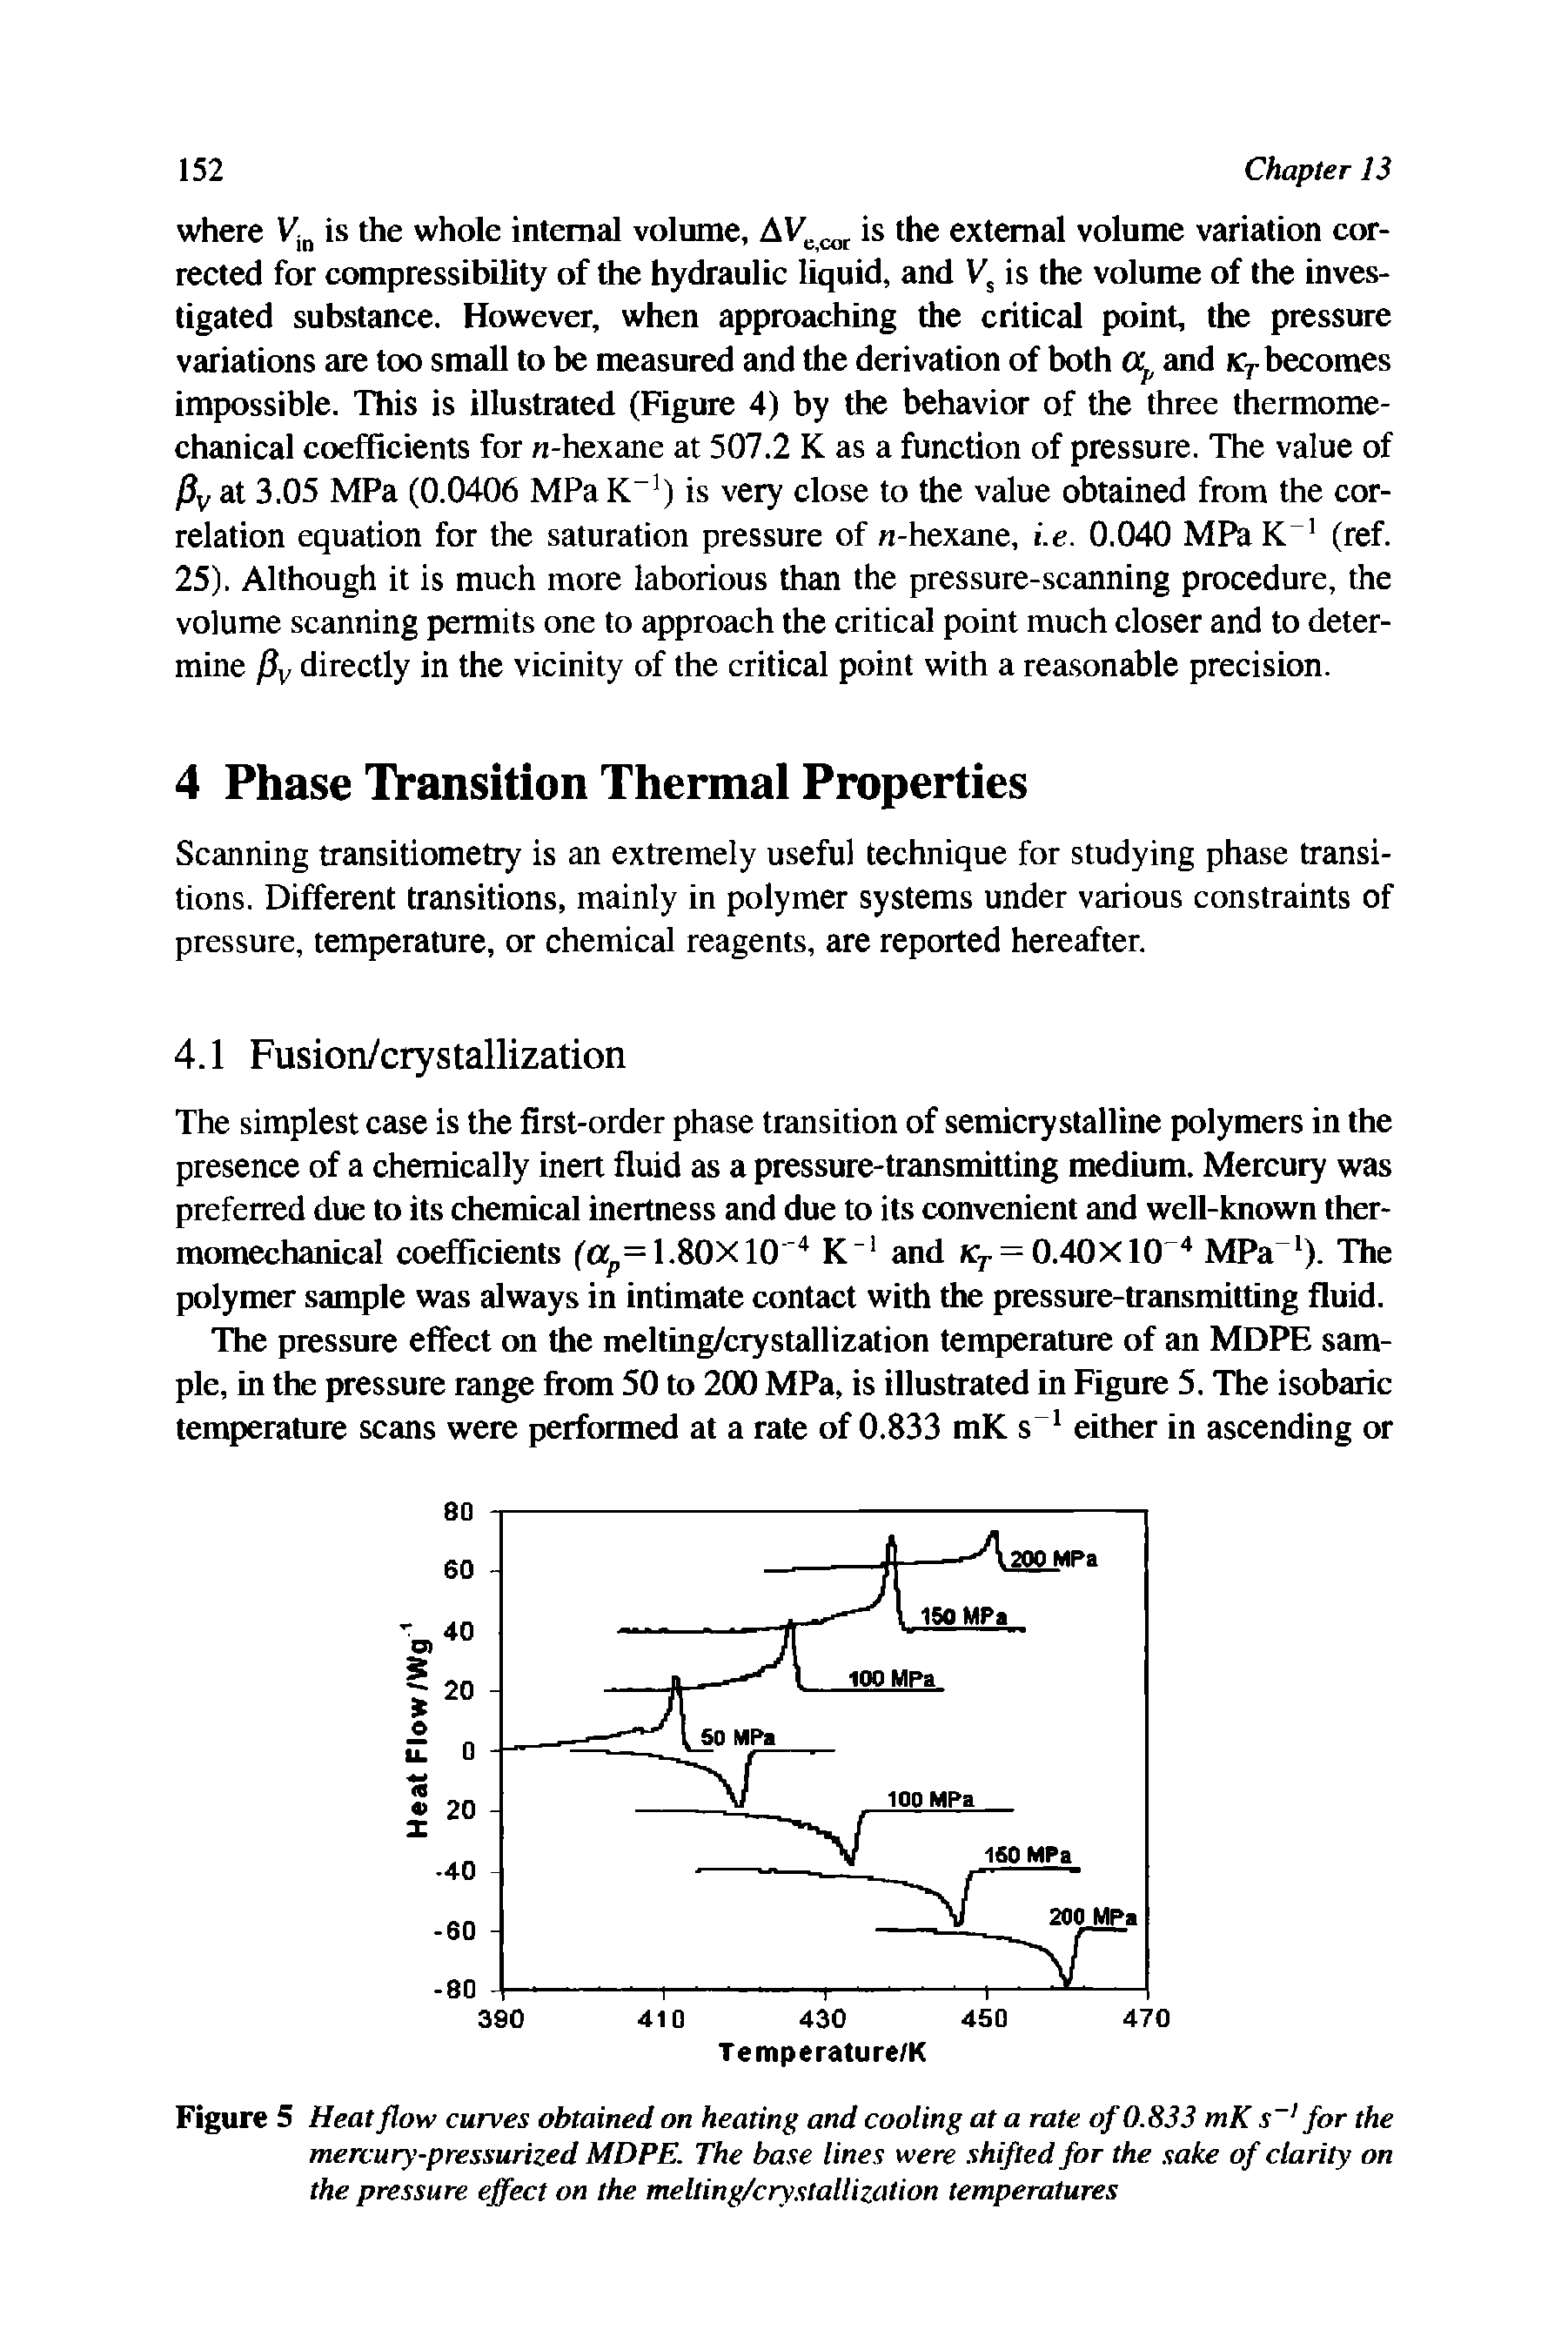 Figure 5 Heat flow curves obtained on heating and cooling at a rate of0.833 mK s for the mercury-pressurized MDPE. The base lines were shifted for the sake of clarity on the pressure effect on the melting/crystallization temperatures...